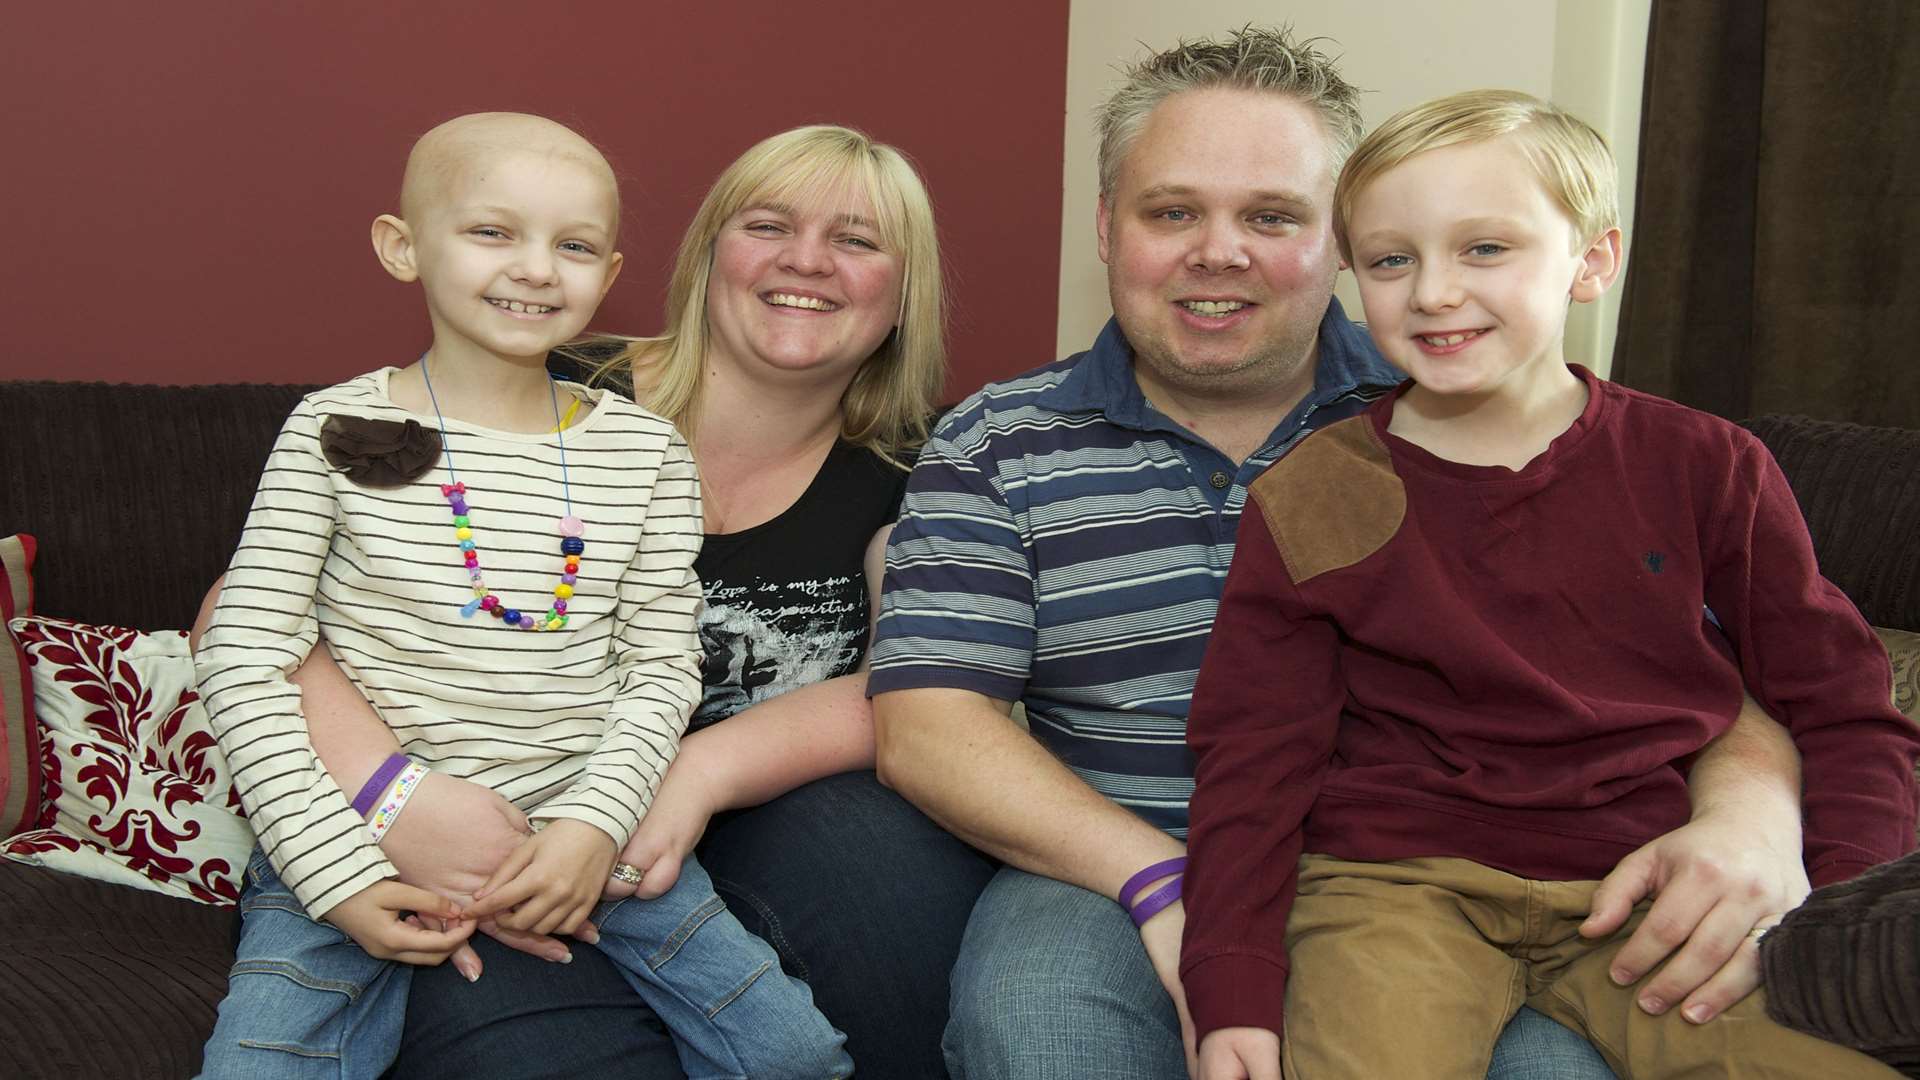 Stacey with her family when they launched their appeal to raise funds for specialist cancer treatment